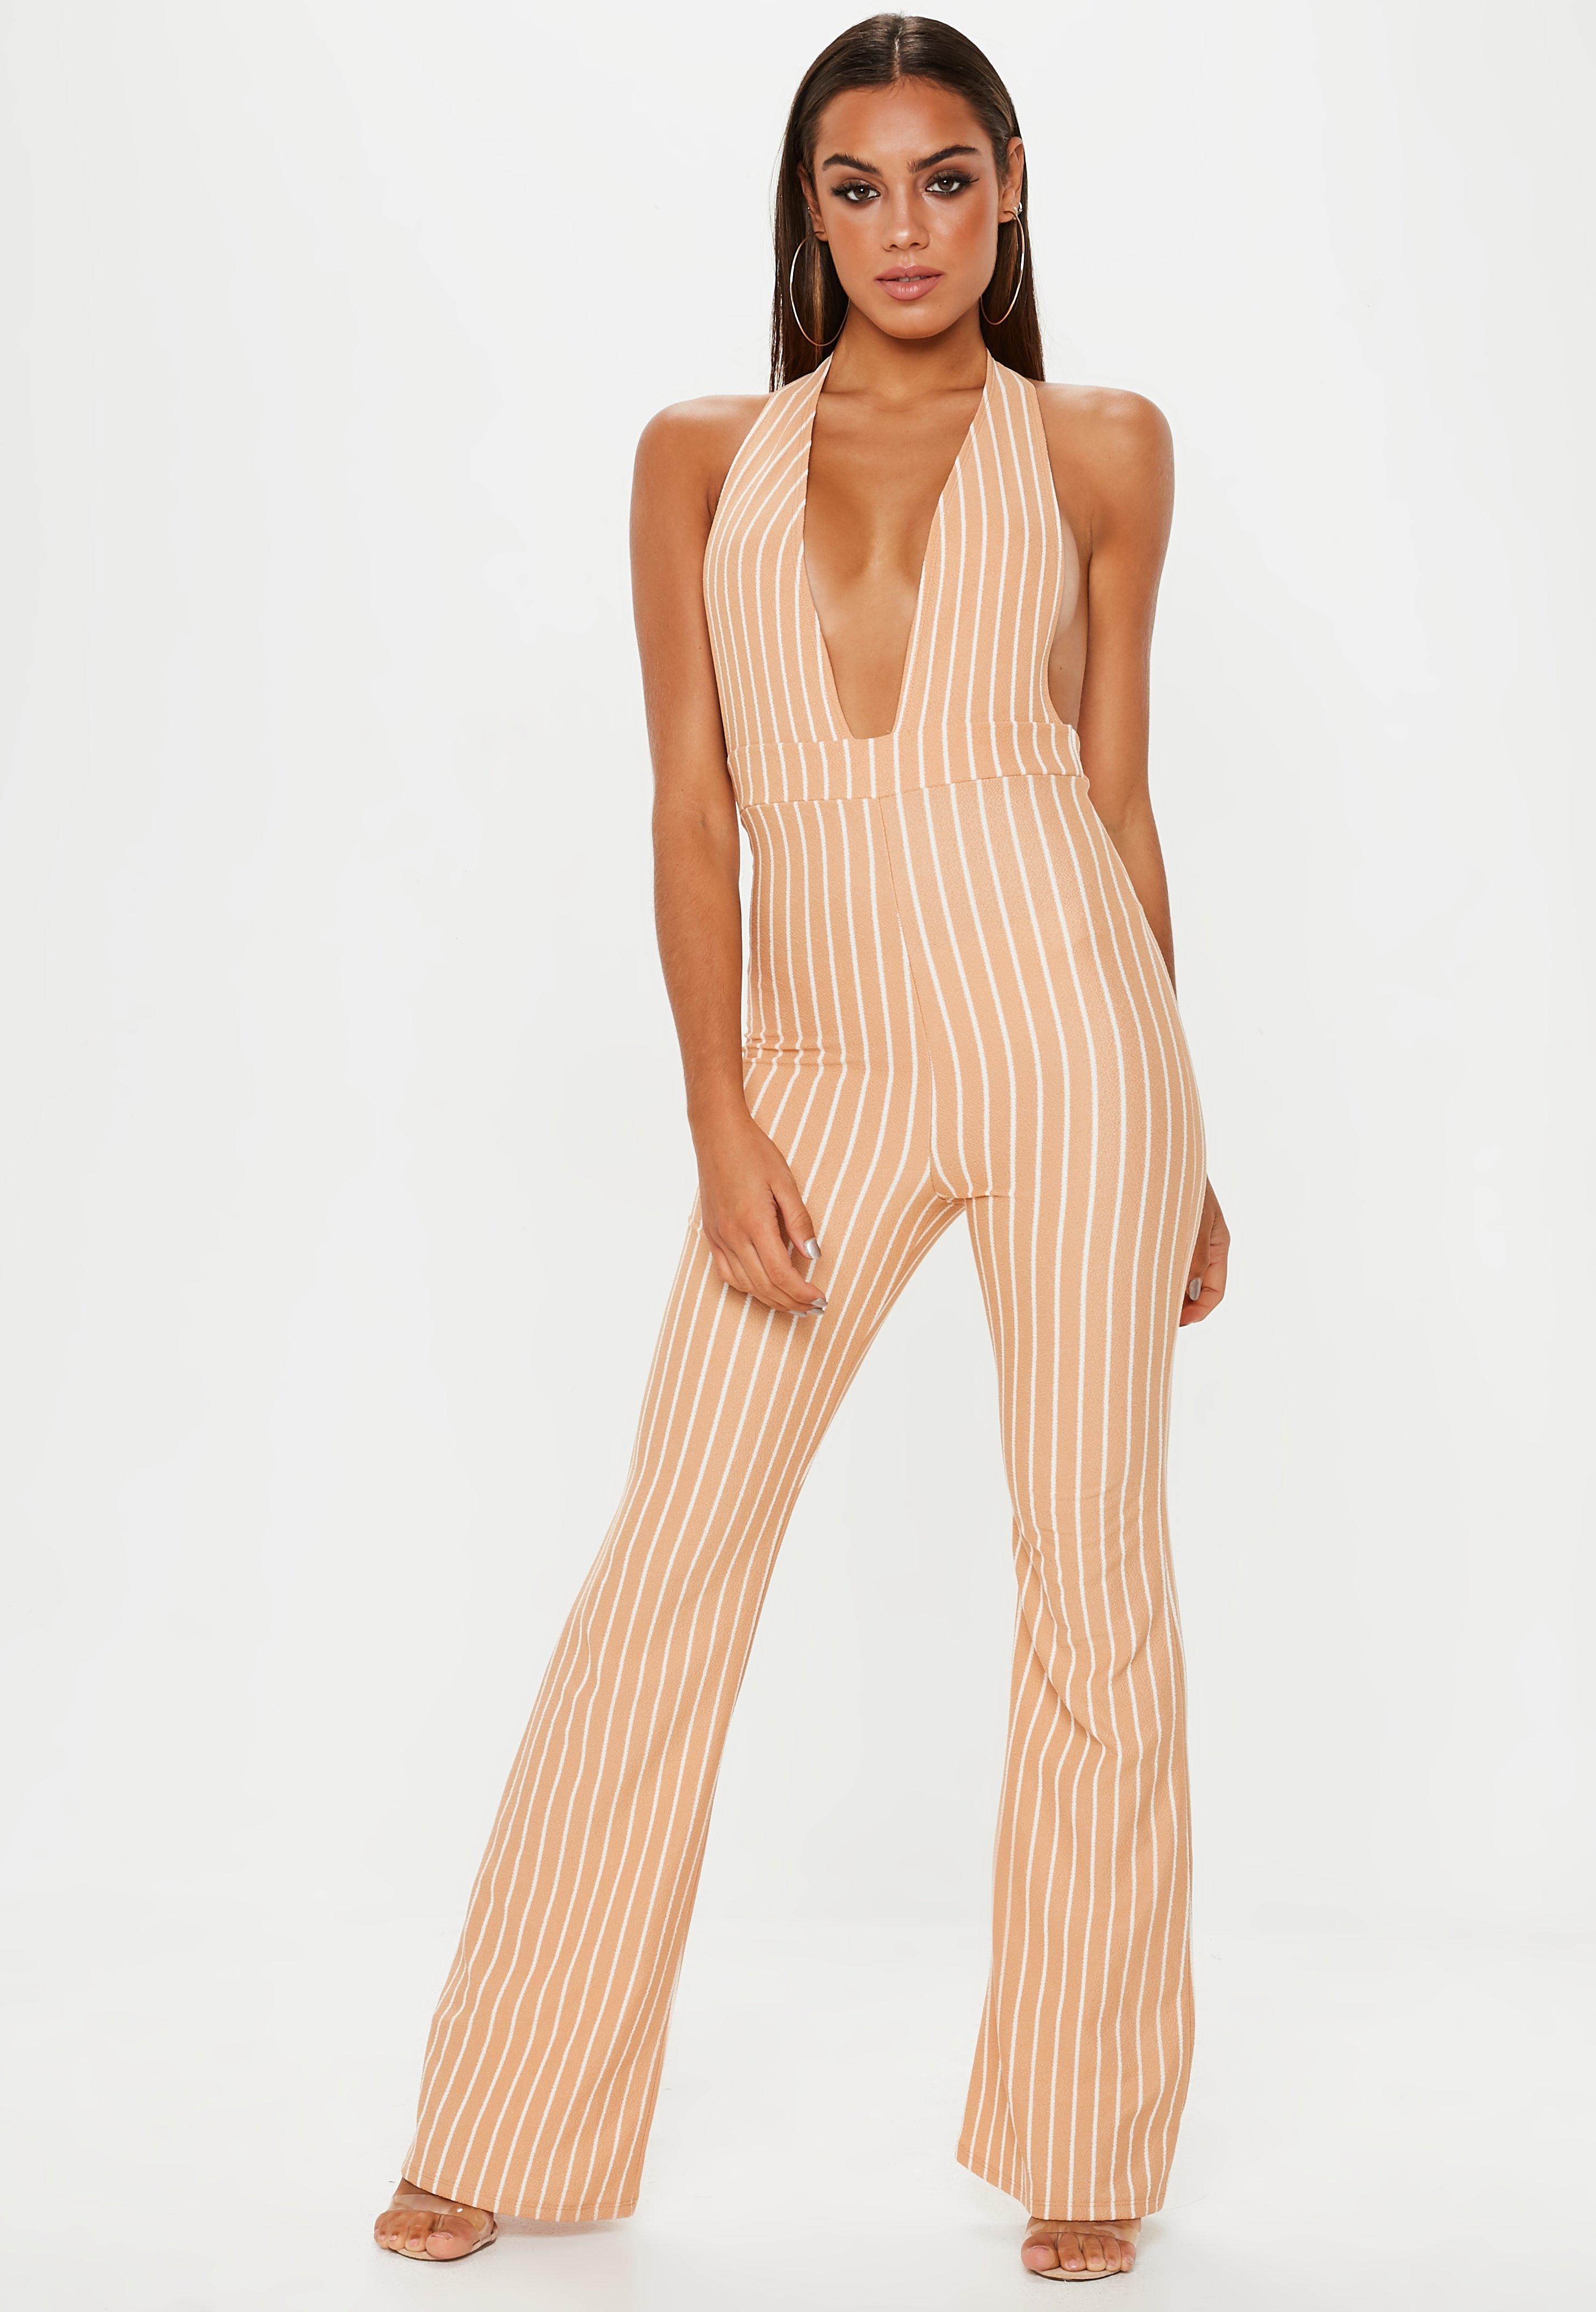 Missguided Synthetic Nude Pinstripe Halter Jumpsuit in Natural - Lyst